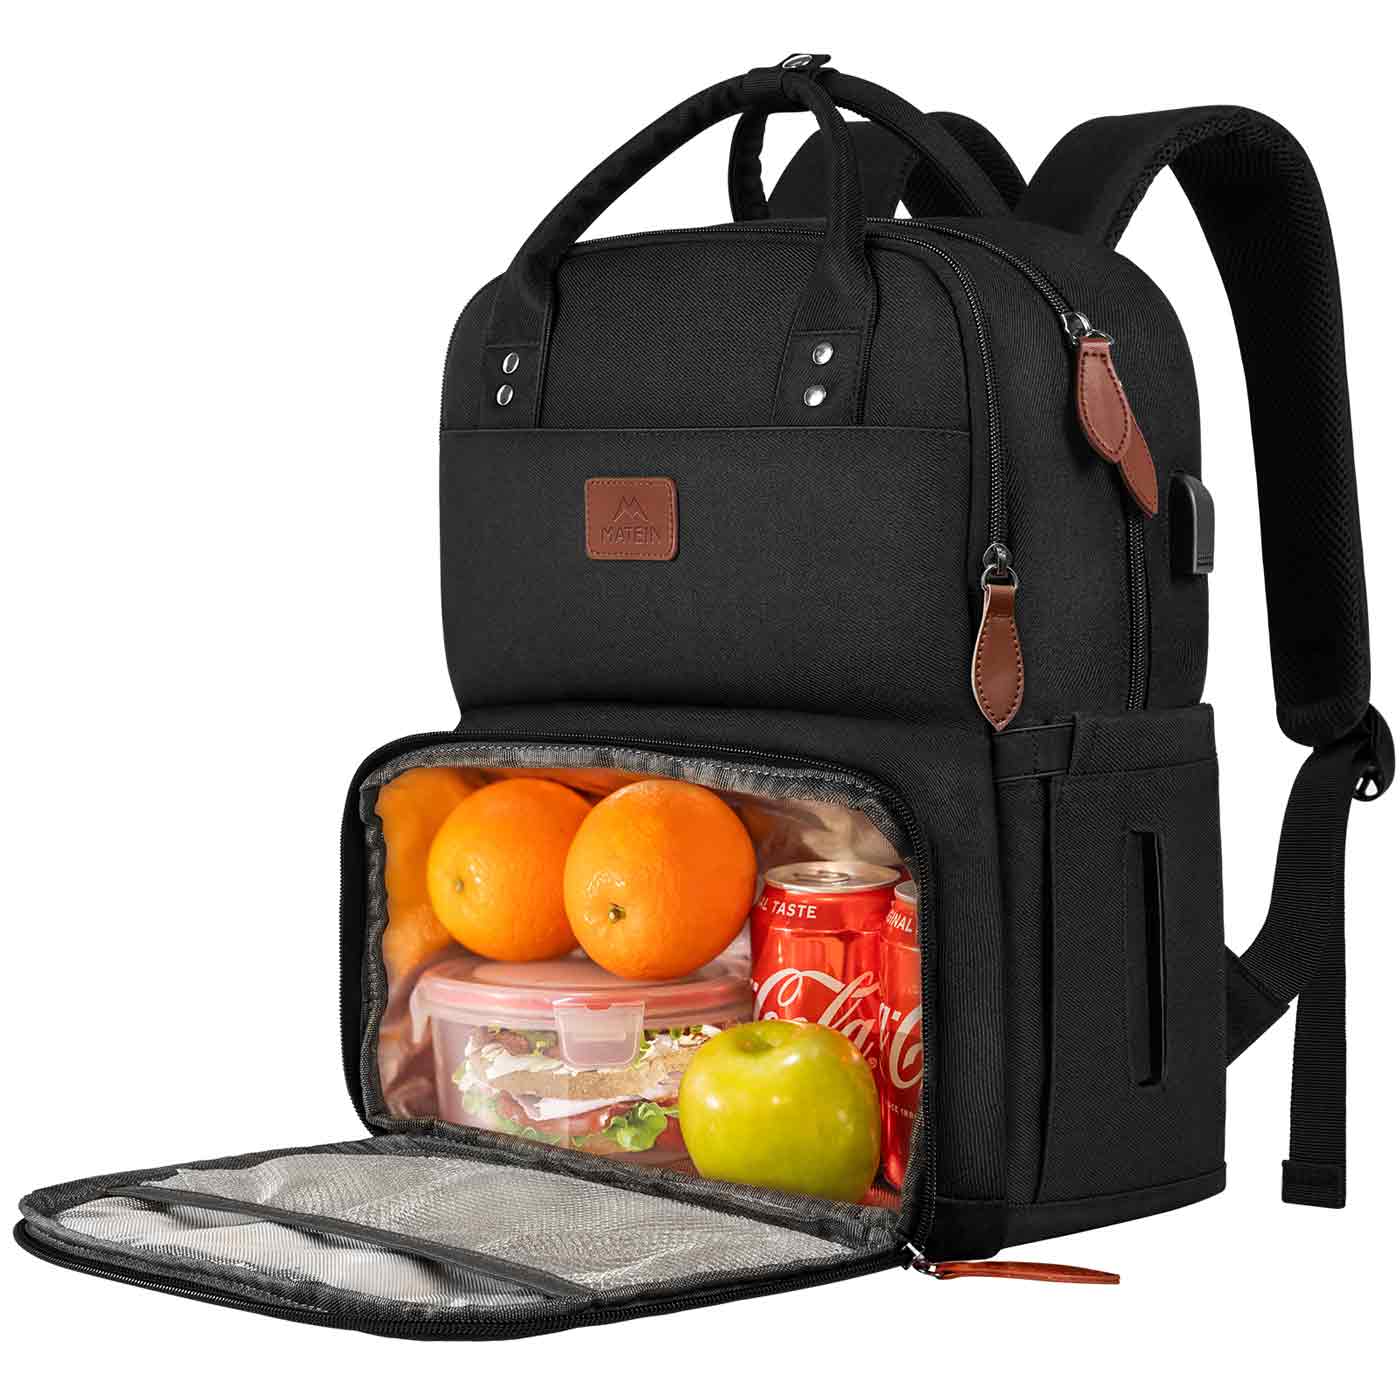 Lunch Bag Insulated Lunch Box for Women Men - Large India